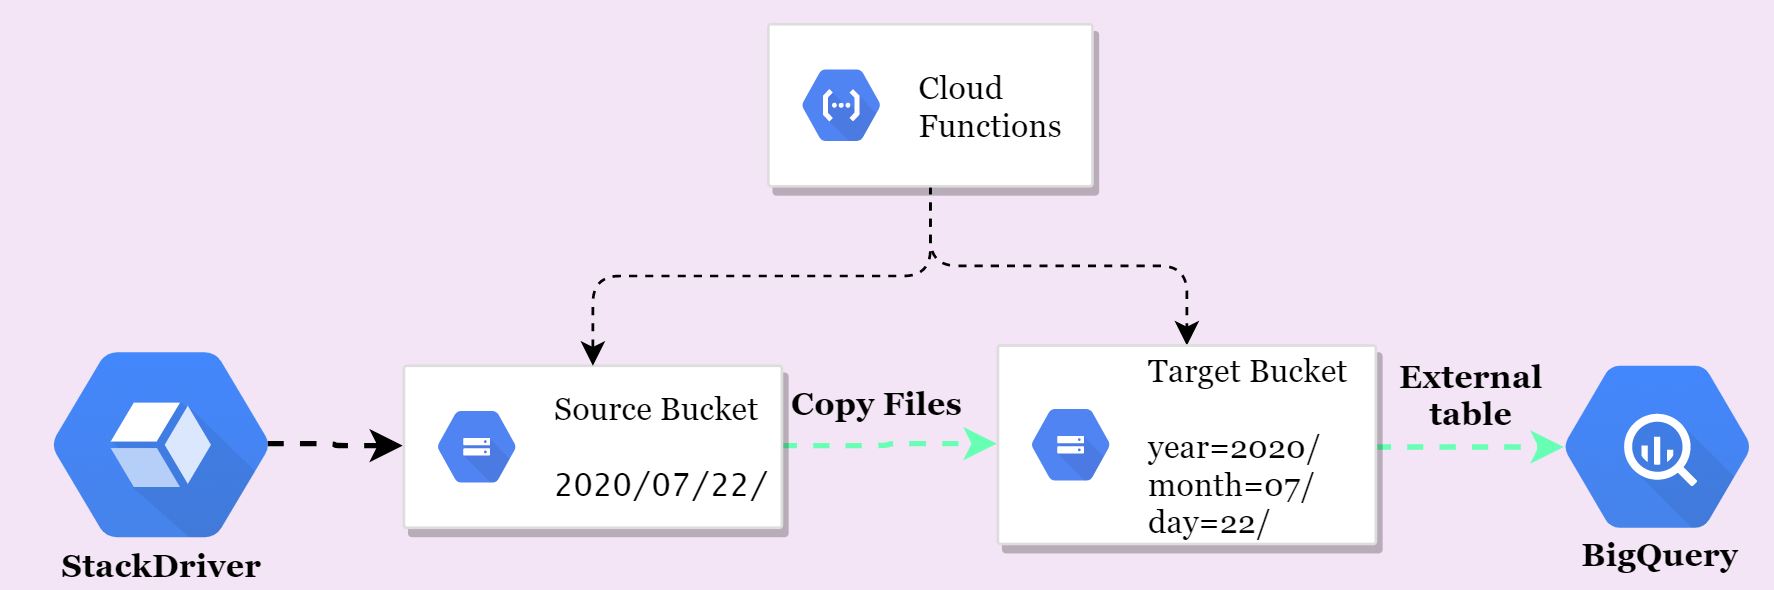 GCP Convert StackDriver Log Sink As Hive Partition In GCS